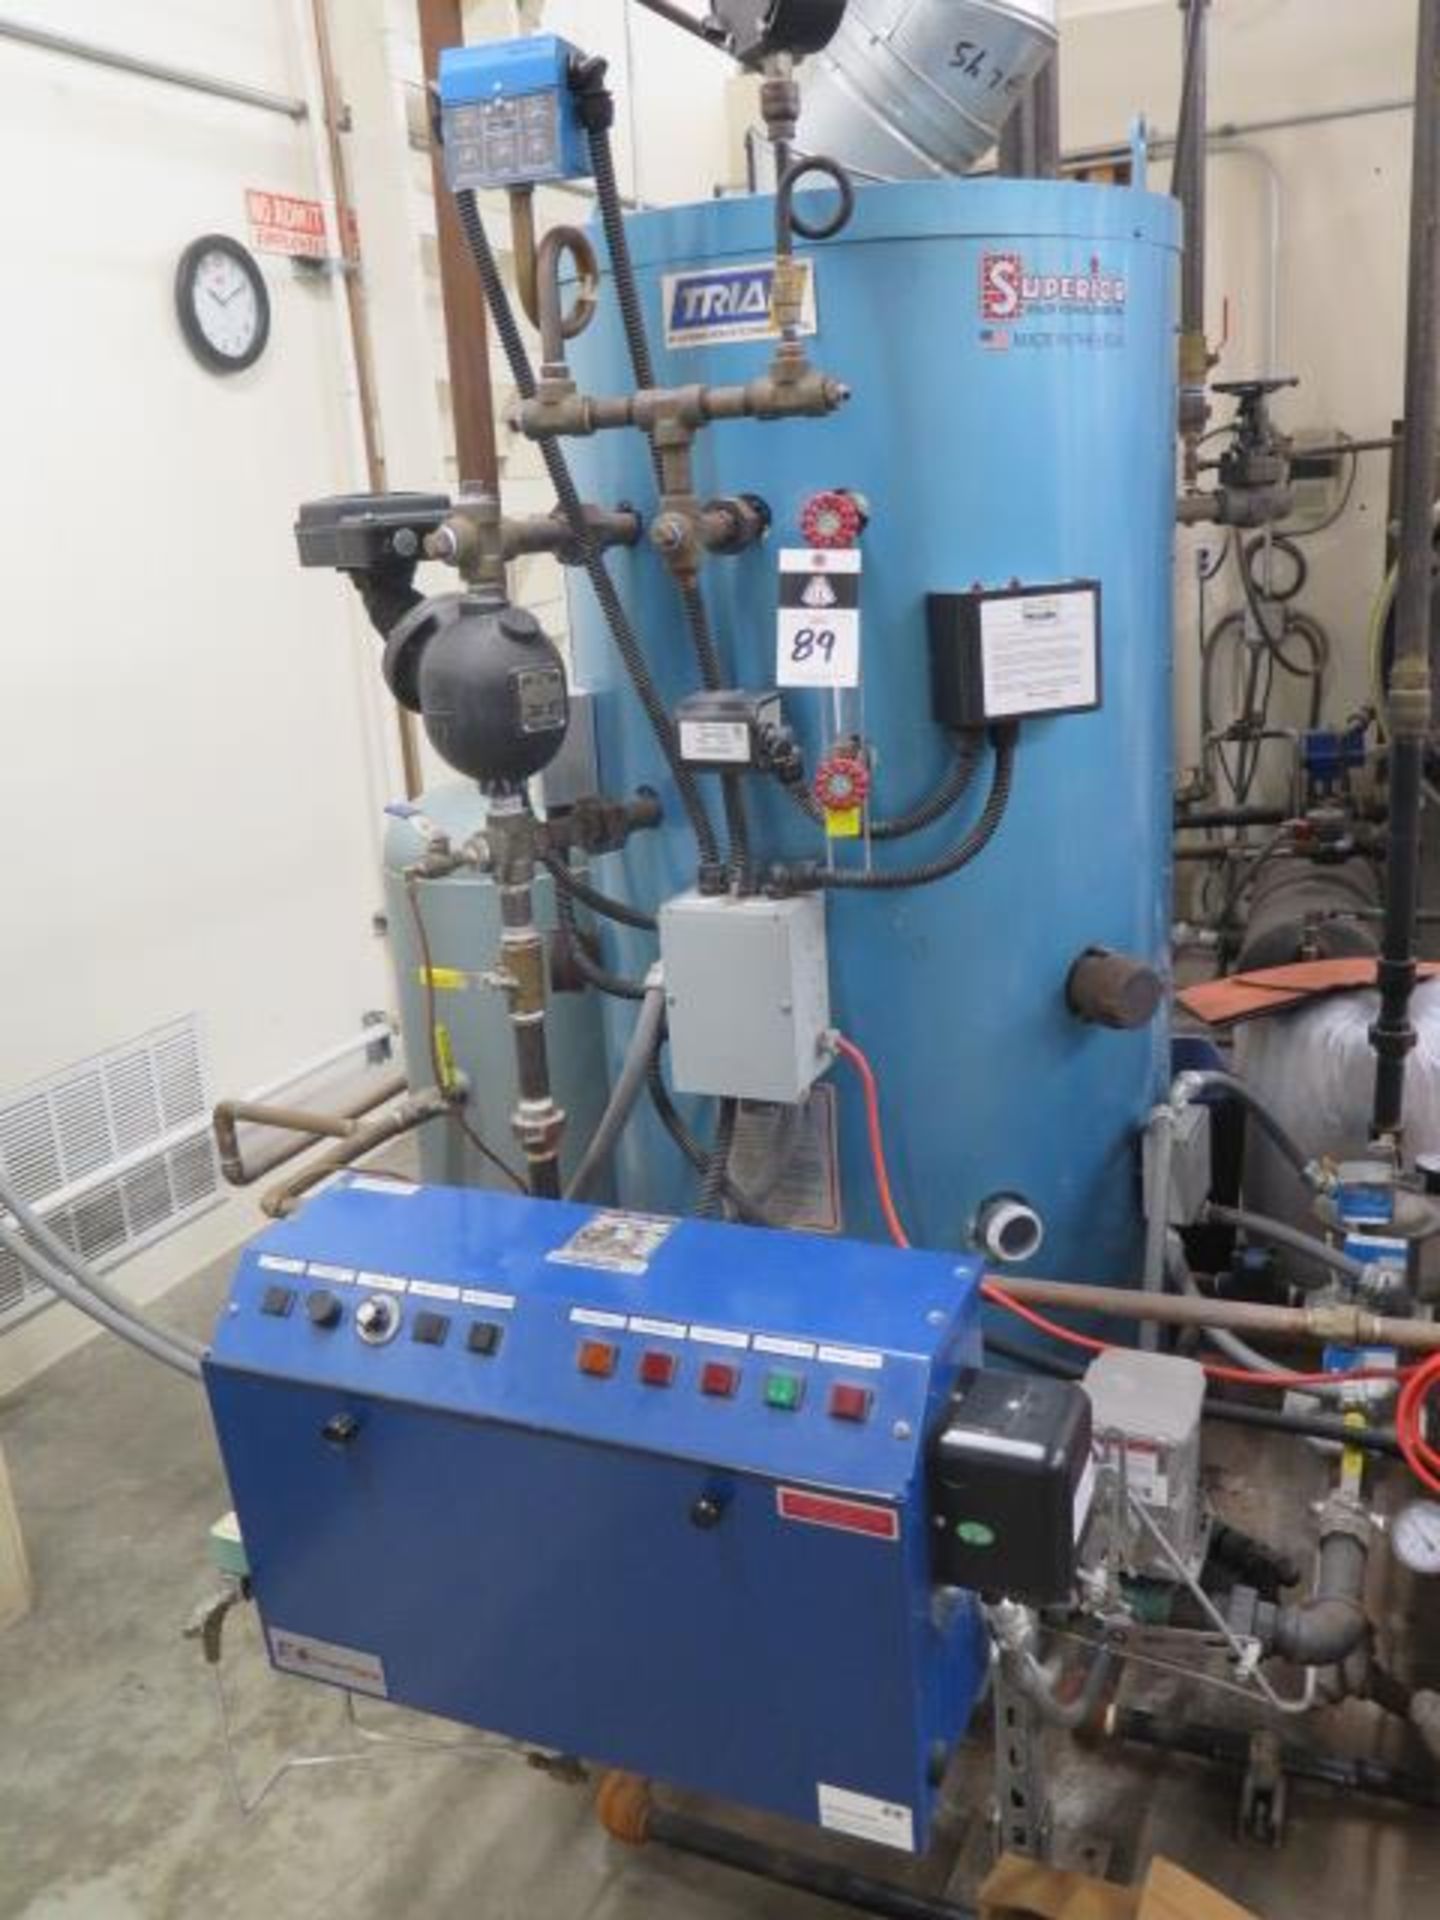 Superior Boiler Works mdl. GMS-900-HP-HEP Gas Fired Boiler s/n 17975 w/ 74 Sq-Ft SOLD AS IS